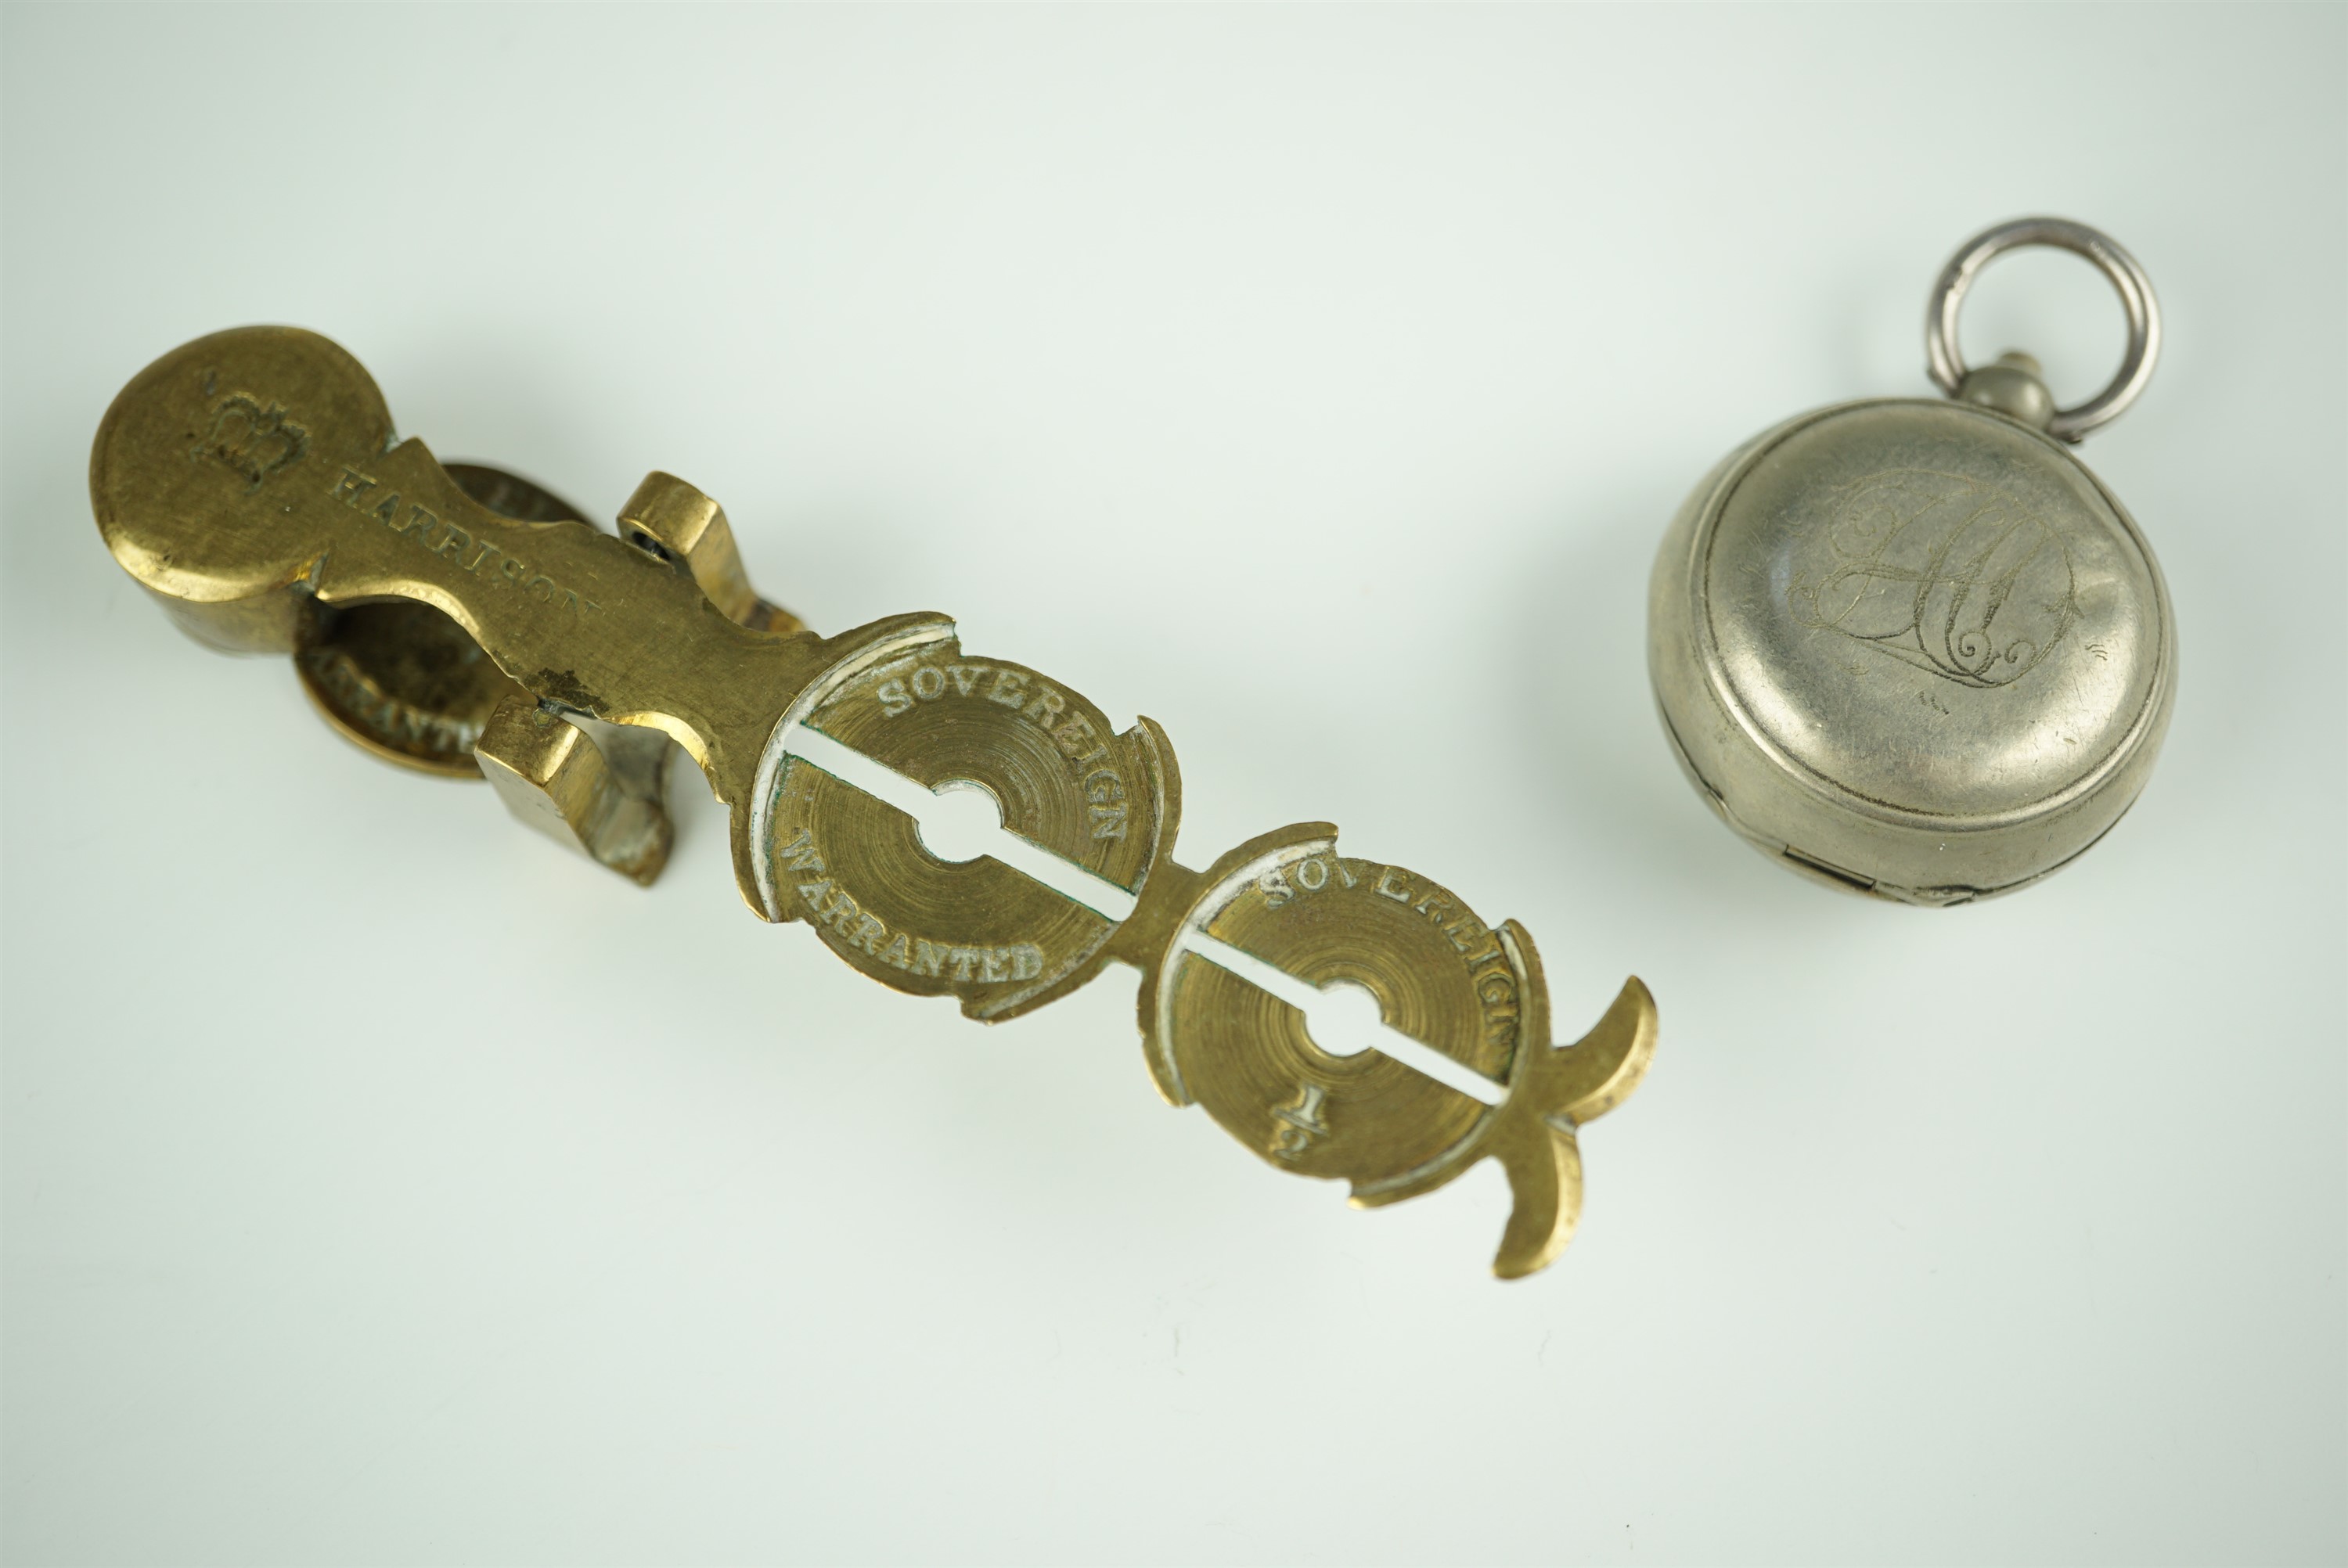 A late 19th / early 20th Century watch chain fob sovereign case, its interior decorated in depiction